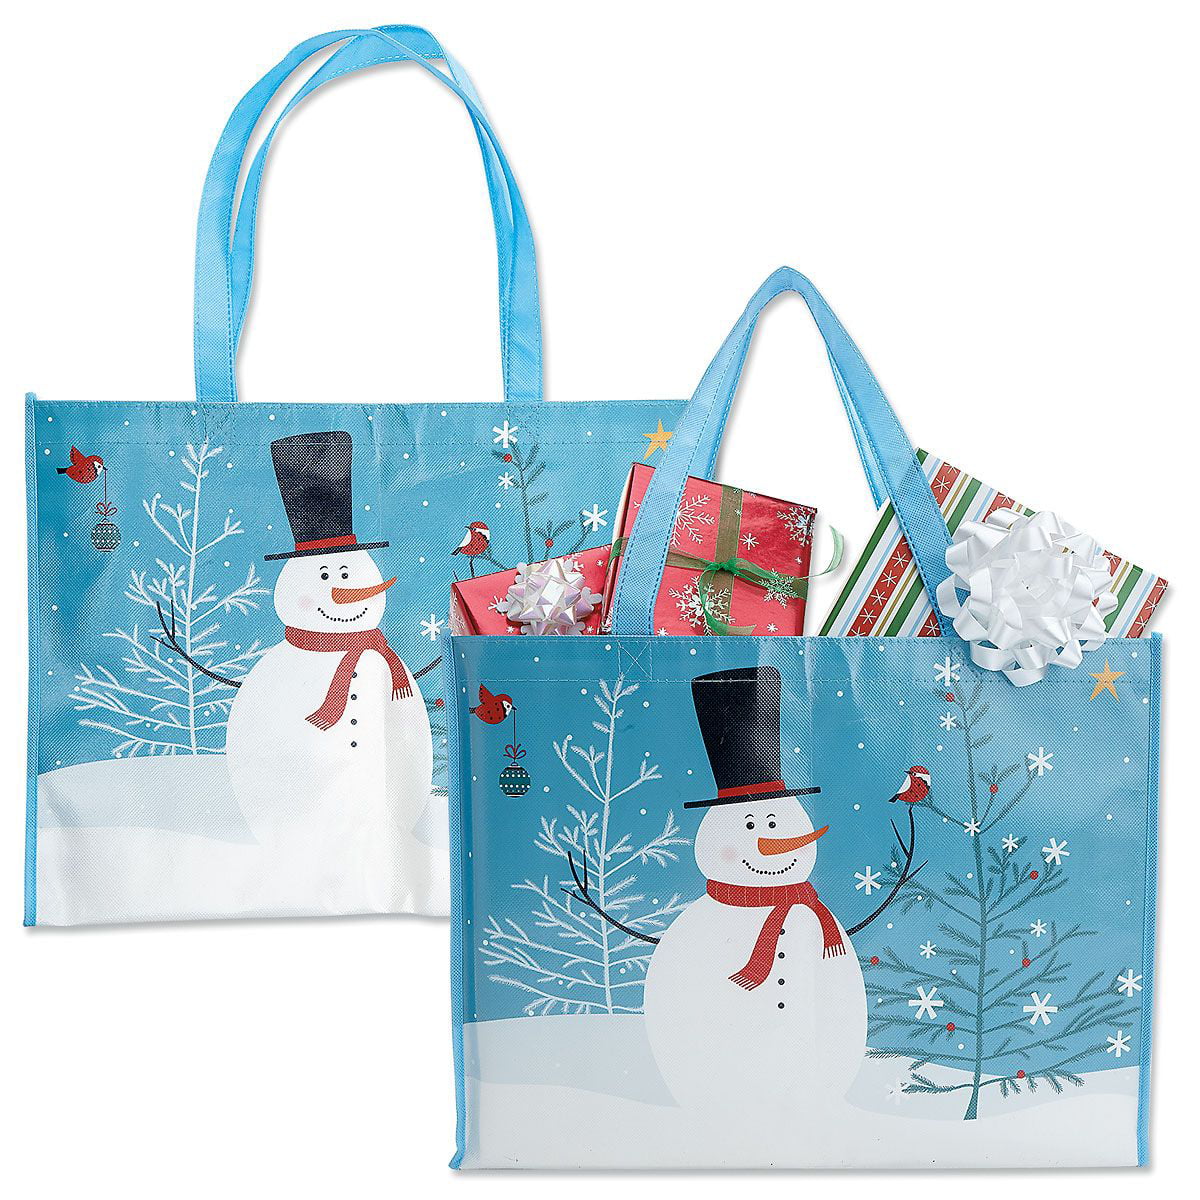 TOTE BAG small GIFT BAG with Snowman 